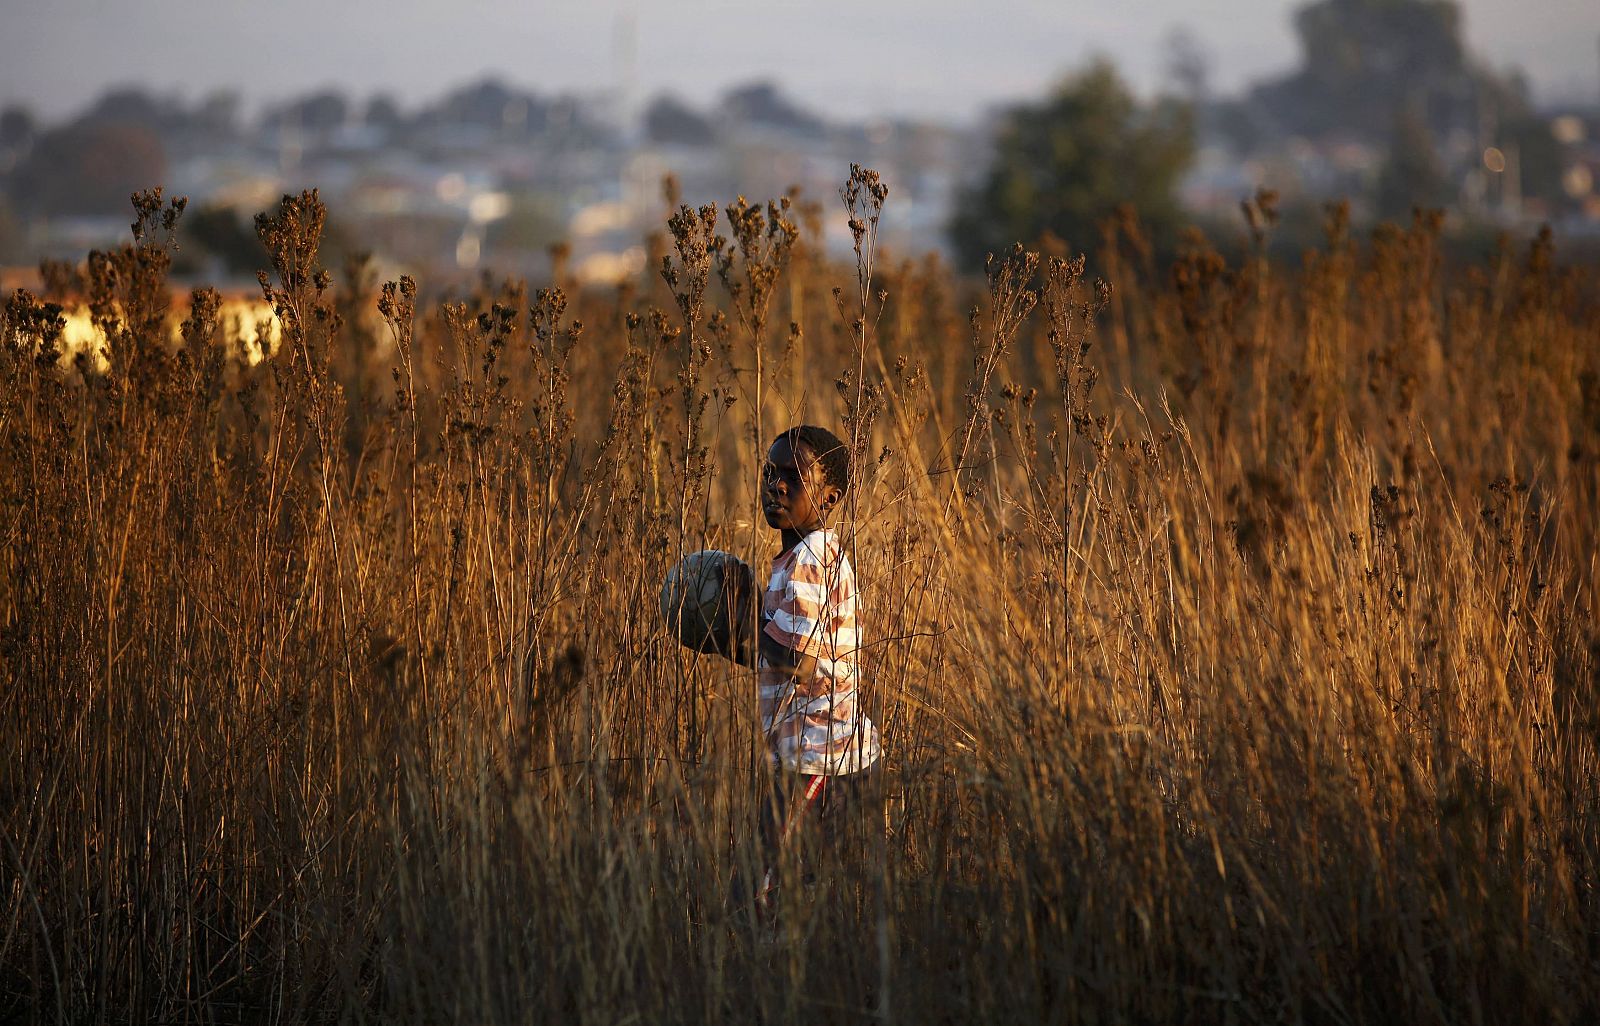 Local child carries a ball while playing soccer at a dirt field in Soweto